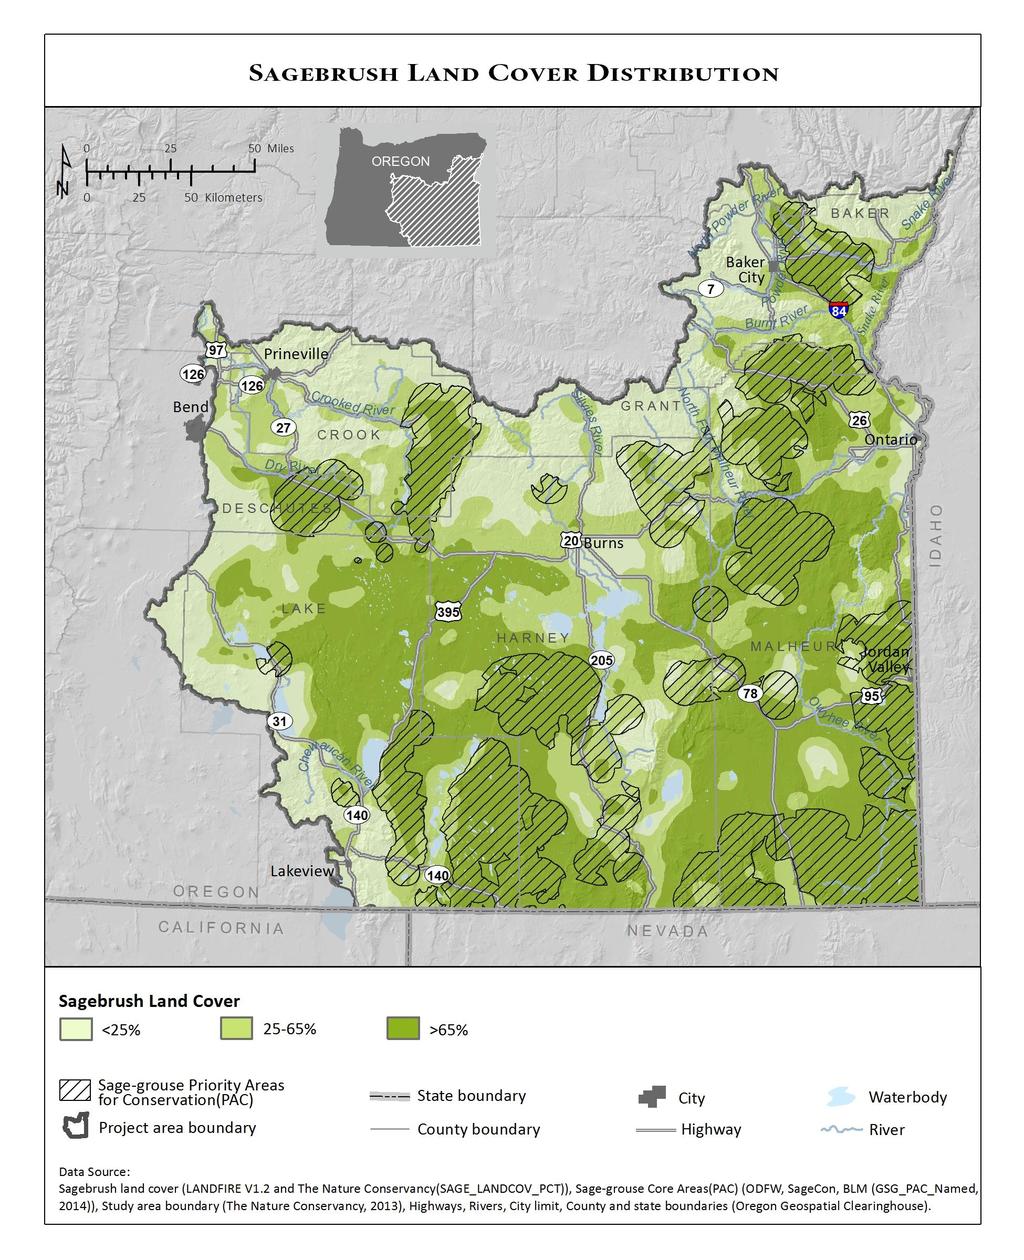 How much sagebrush is present in priority areas (PACs)